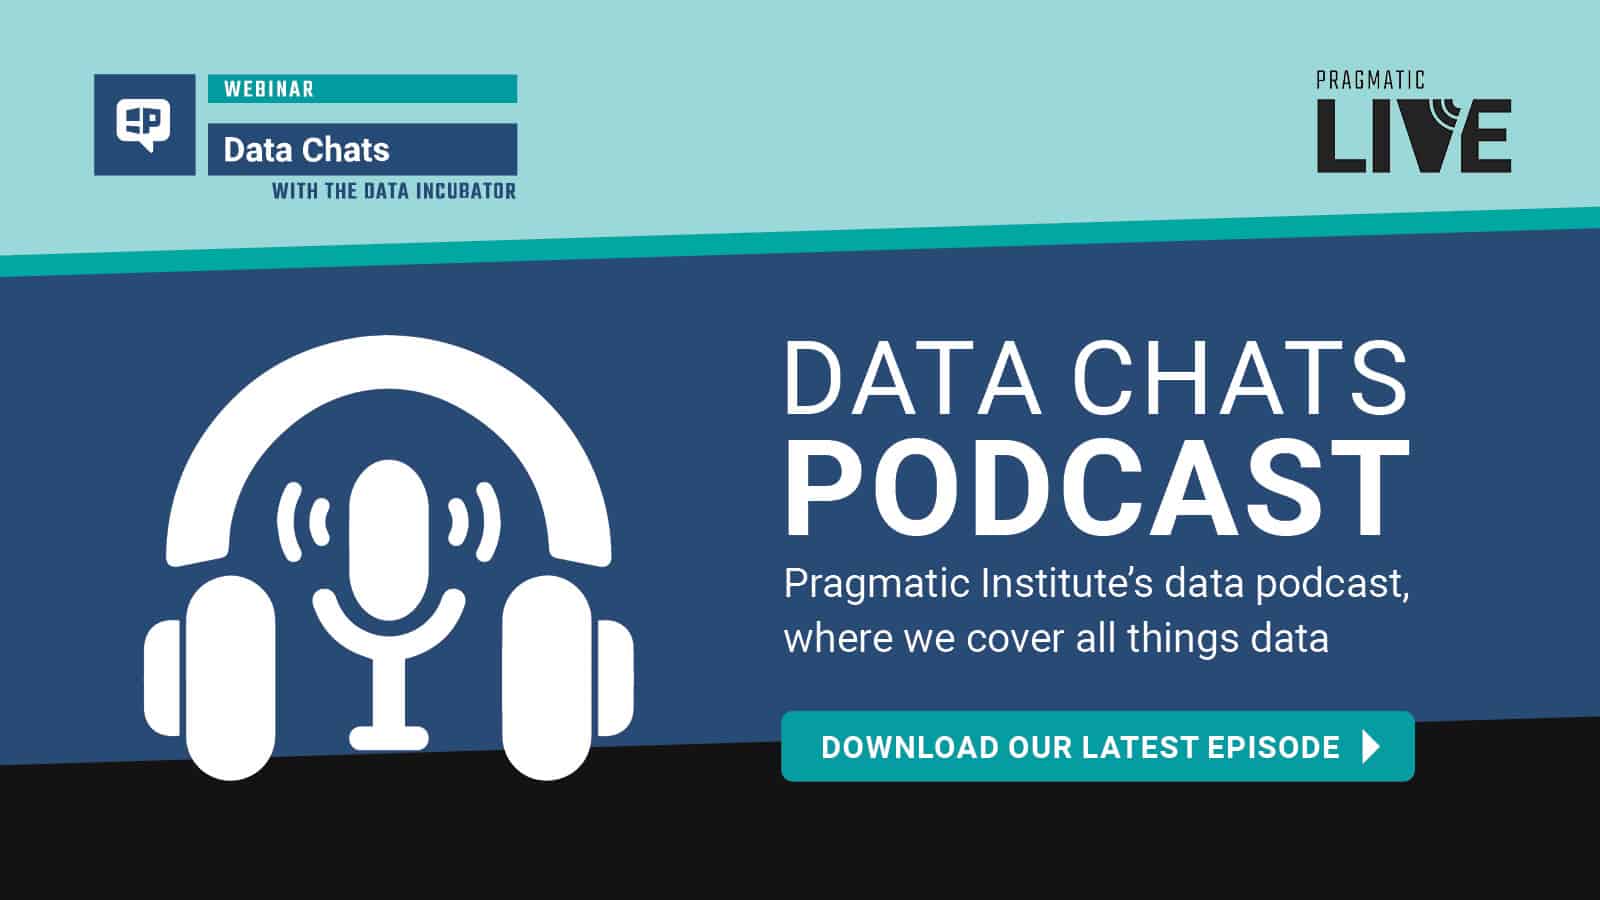 Promo Graphic for Data Chats Podcast by Pragmatic Institute and The Data Incubator